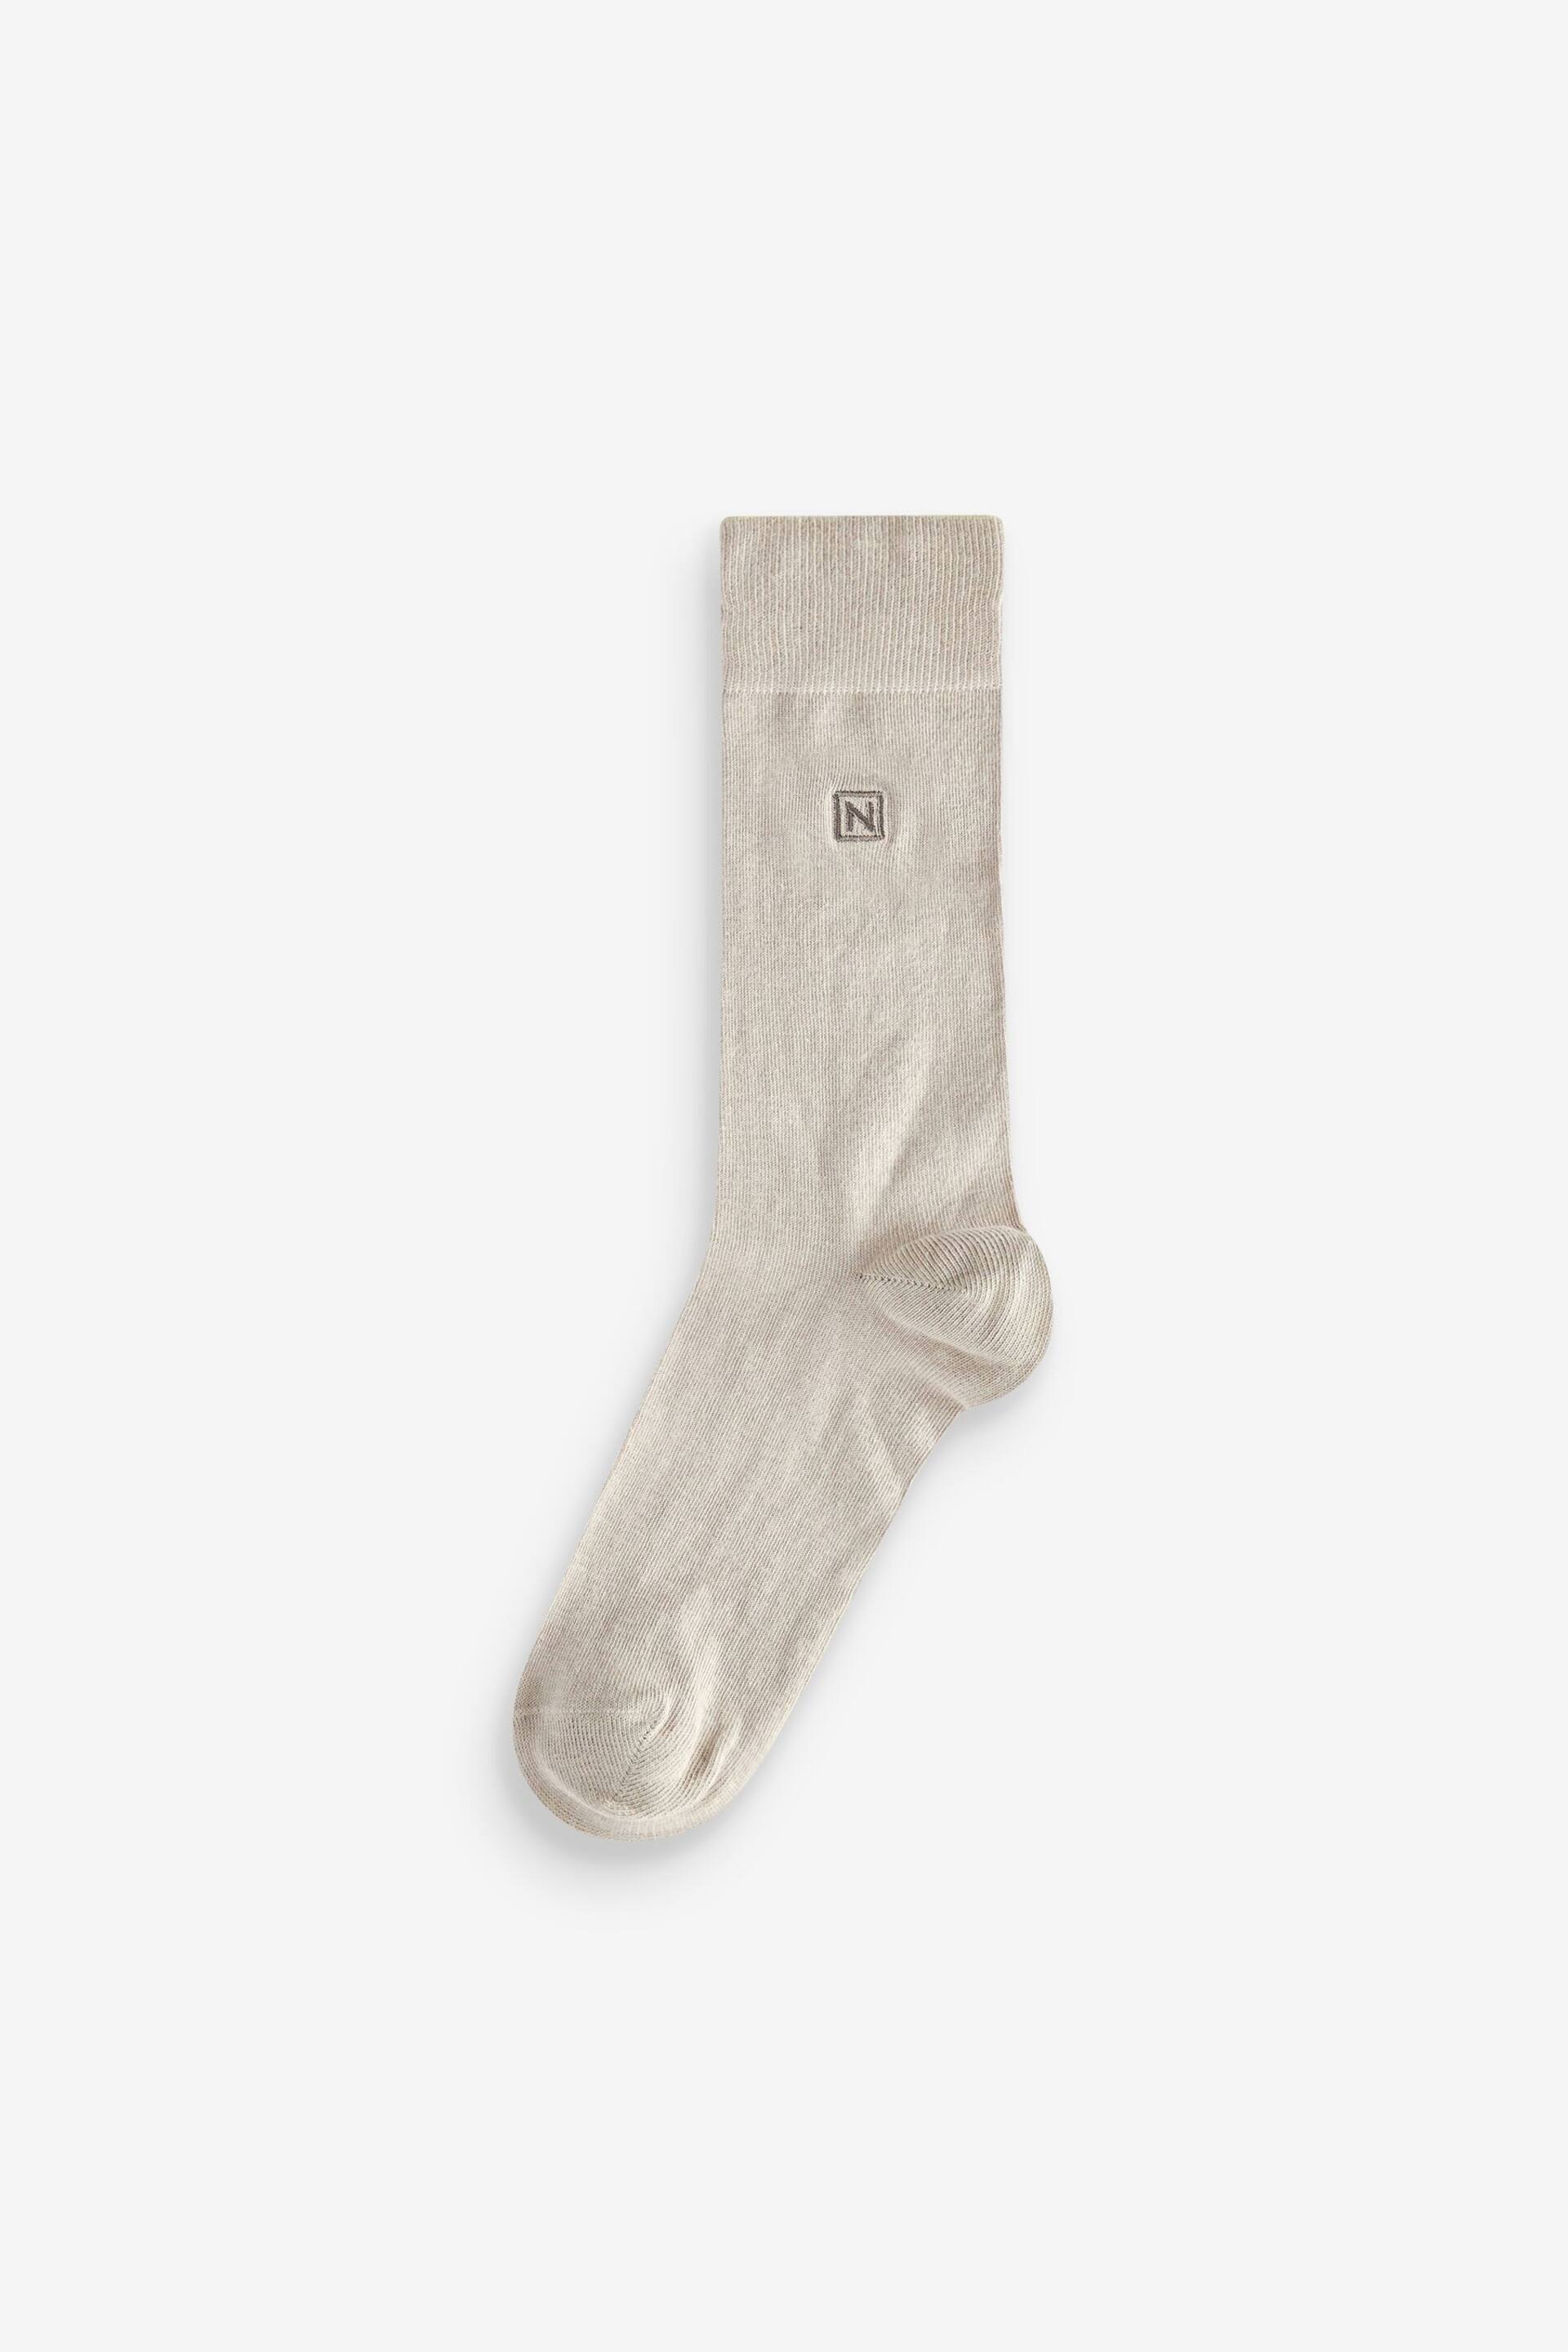 Blue/Neutrals 8 Pack Embroidered Lasting Fresh Socks - Image 4 of 10